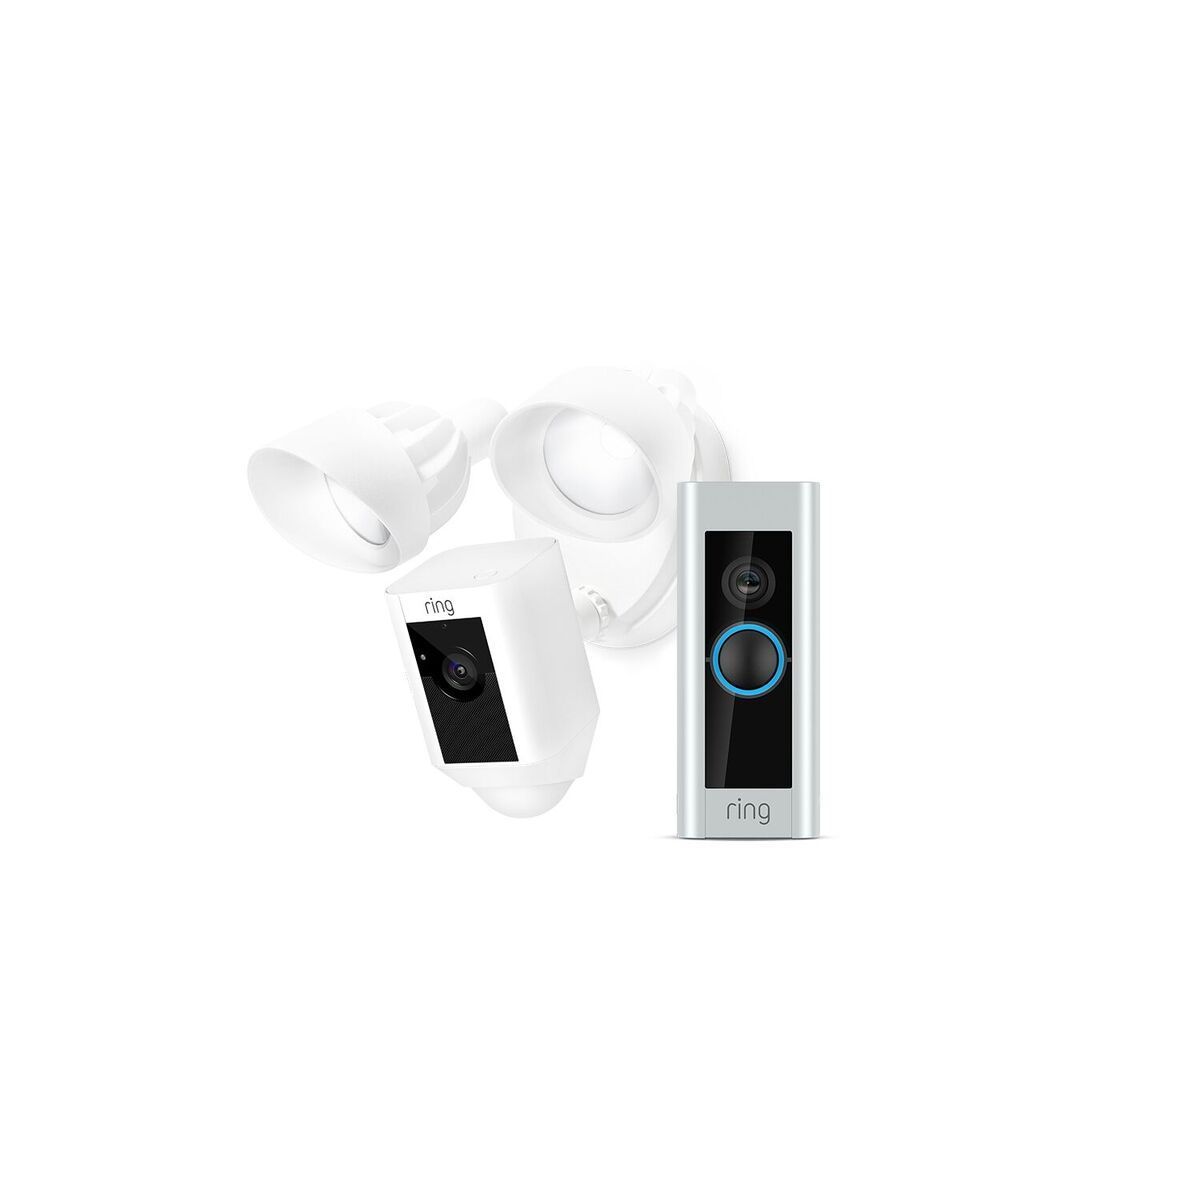 Ring Alarm Pack - L with Alarm Outdoor Siren by Amazon | Smart home alarm  security system with optional Assisted Monitoring - No long-term  commitments | Works with Alexa : Amazon.co.uk: Everything Else